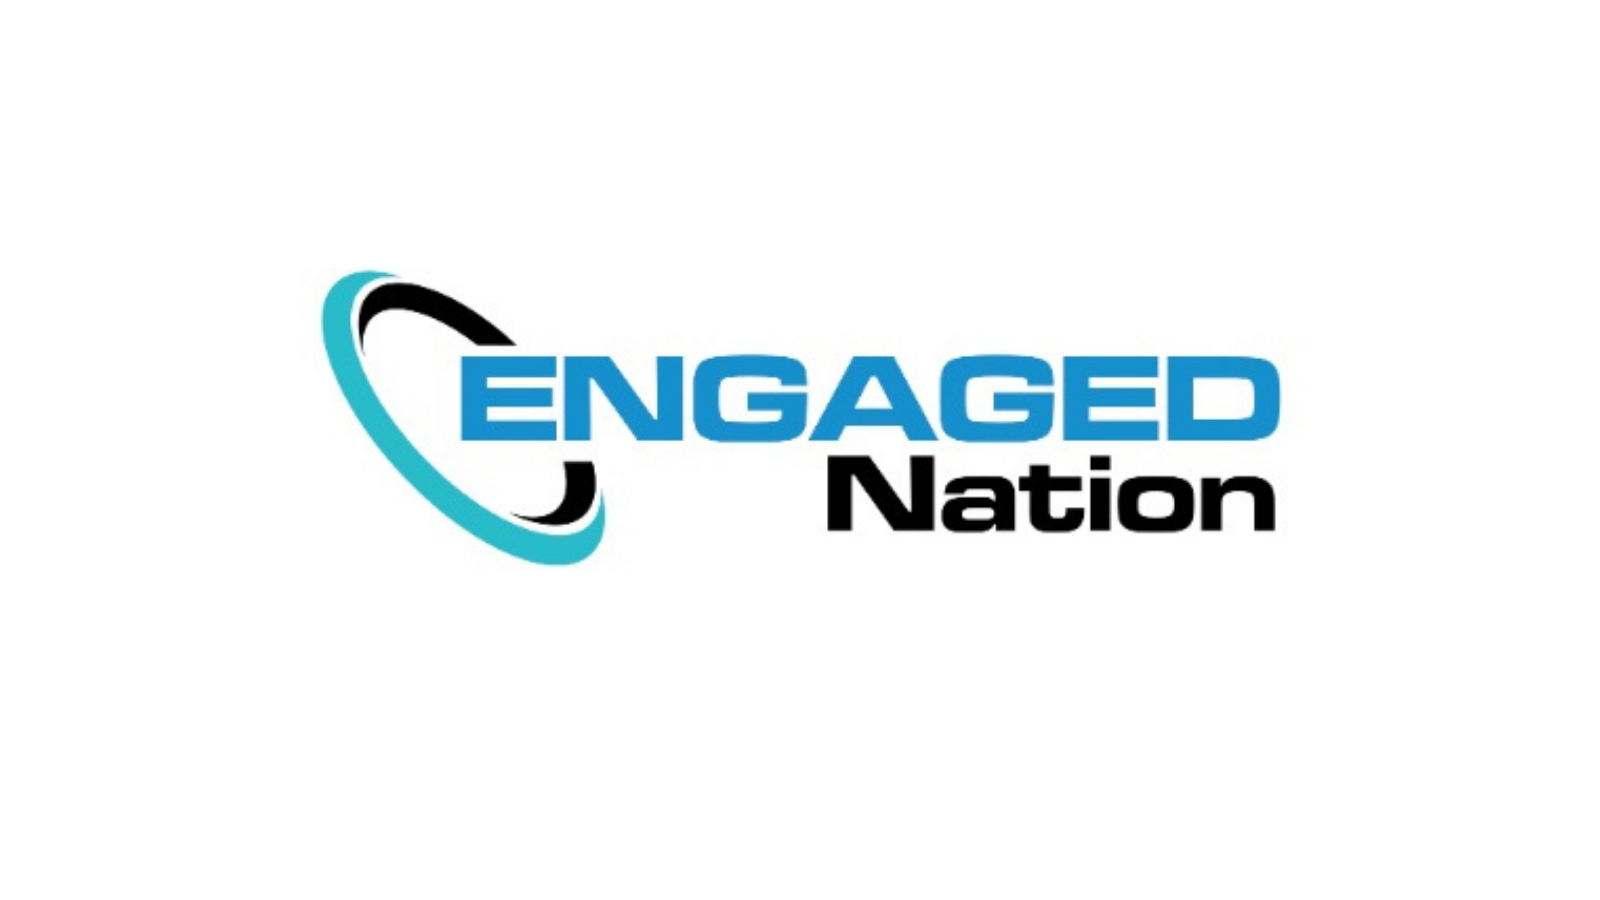 Global Payments Gaming Solutions Selects Engaged Nation as their Strategic Marketing and Communications Partner